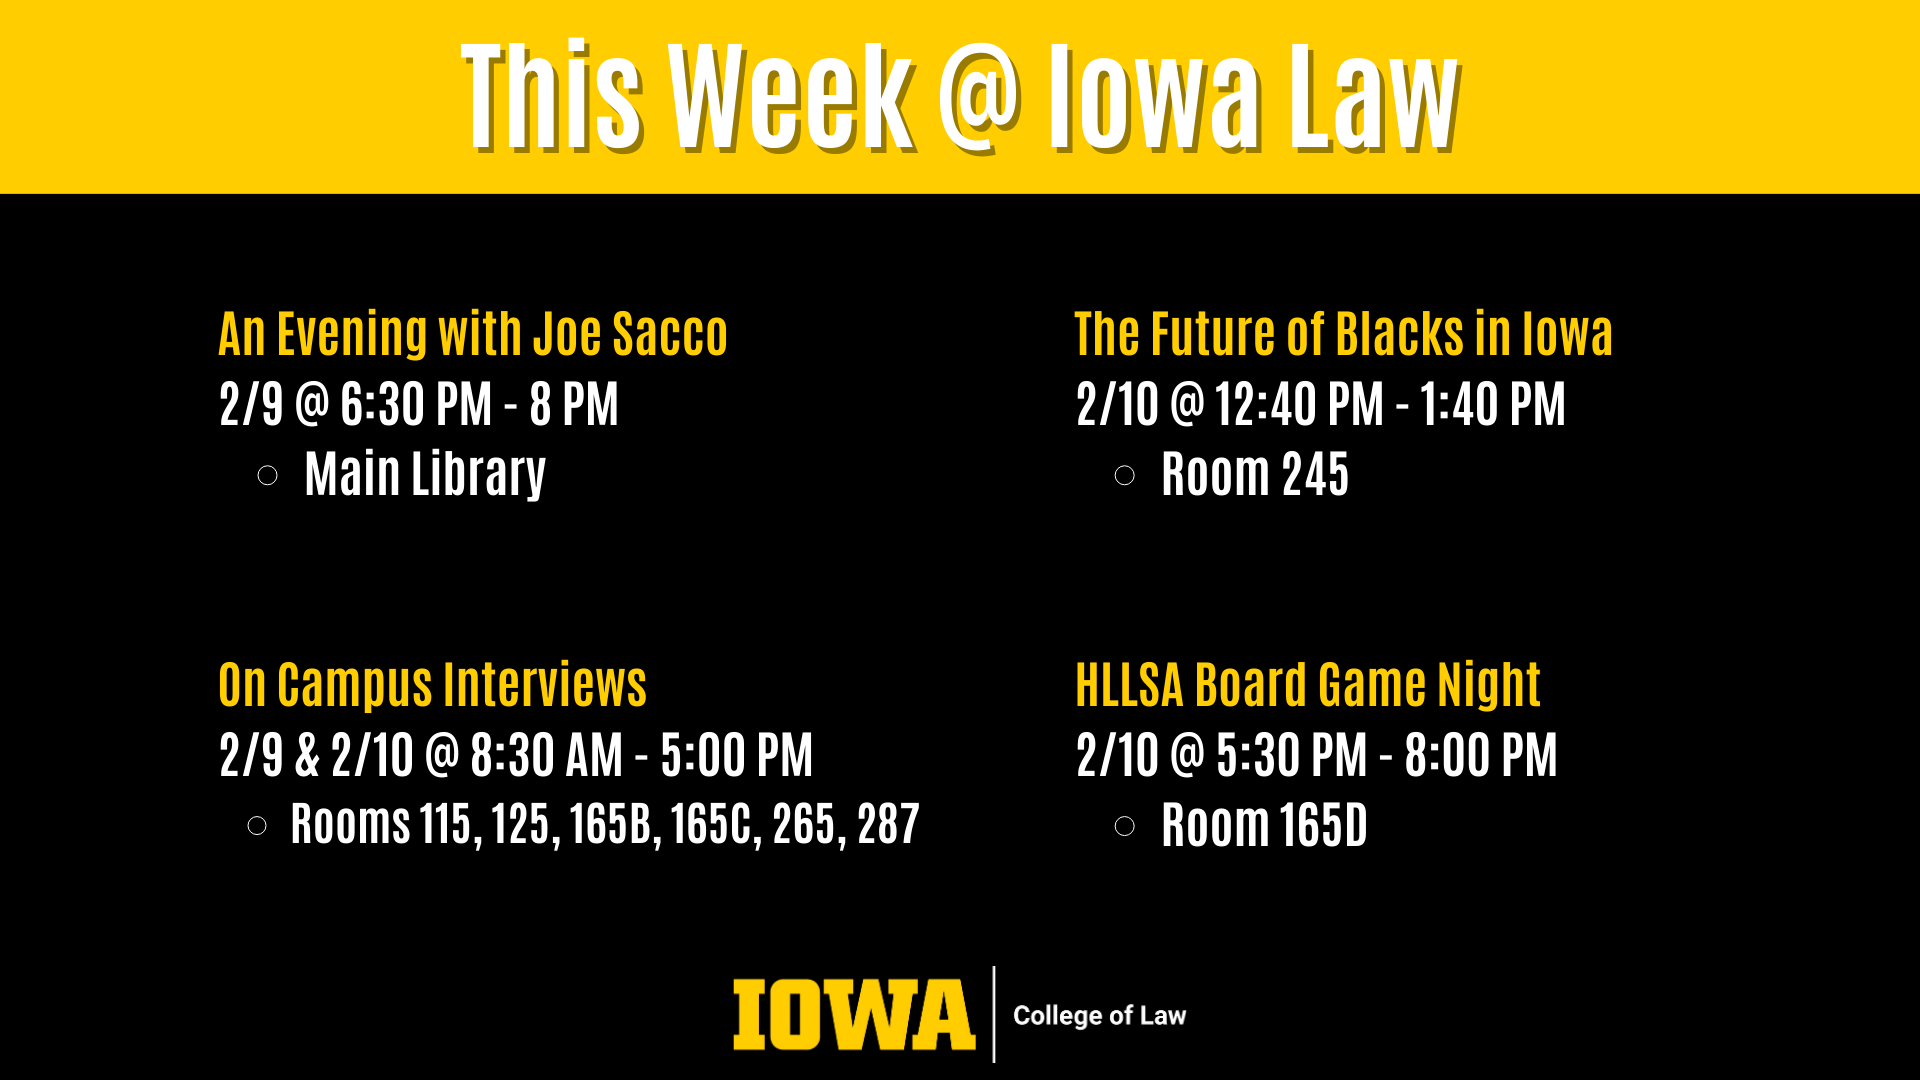 This Week @ Iowa Law On Campus Interviews  2/9 & 2/10 @ 8:30 AM - 5:00 PM  Rooms 115, 125, 165B, 165C, 265, 287 An Evening with Joe Sacco 2/9 @ 6:30 PM - 8 PM Main Library The Future of Blacks in Iowa 2/10 @ 12:40 PM - 1:40 PM Room 245 HLLSA Board Game Night 2/10 @ 5:30 PM - 8:00 PM Room 165D